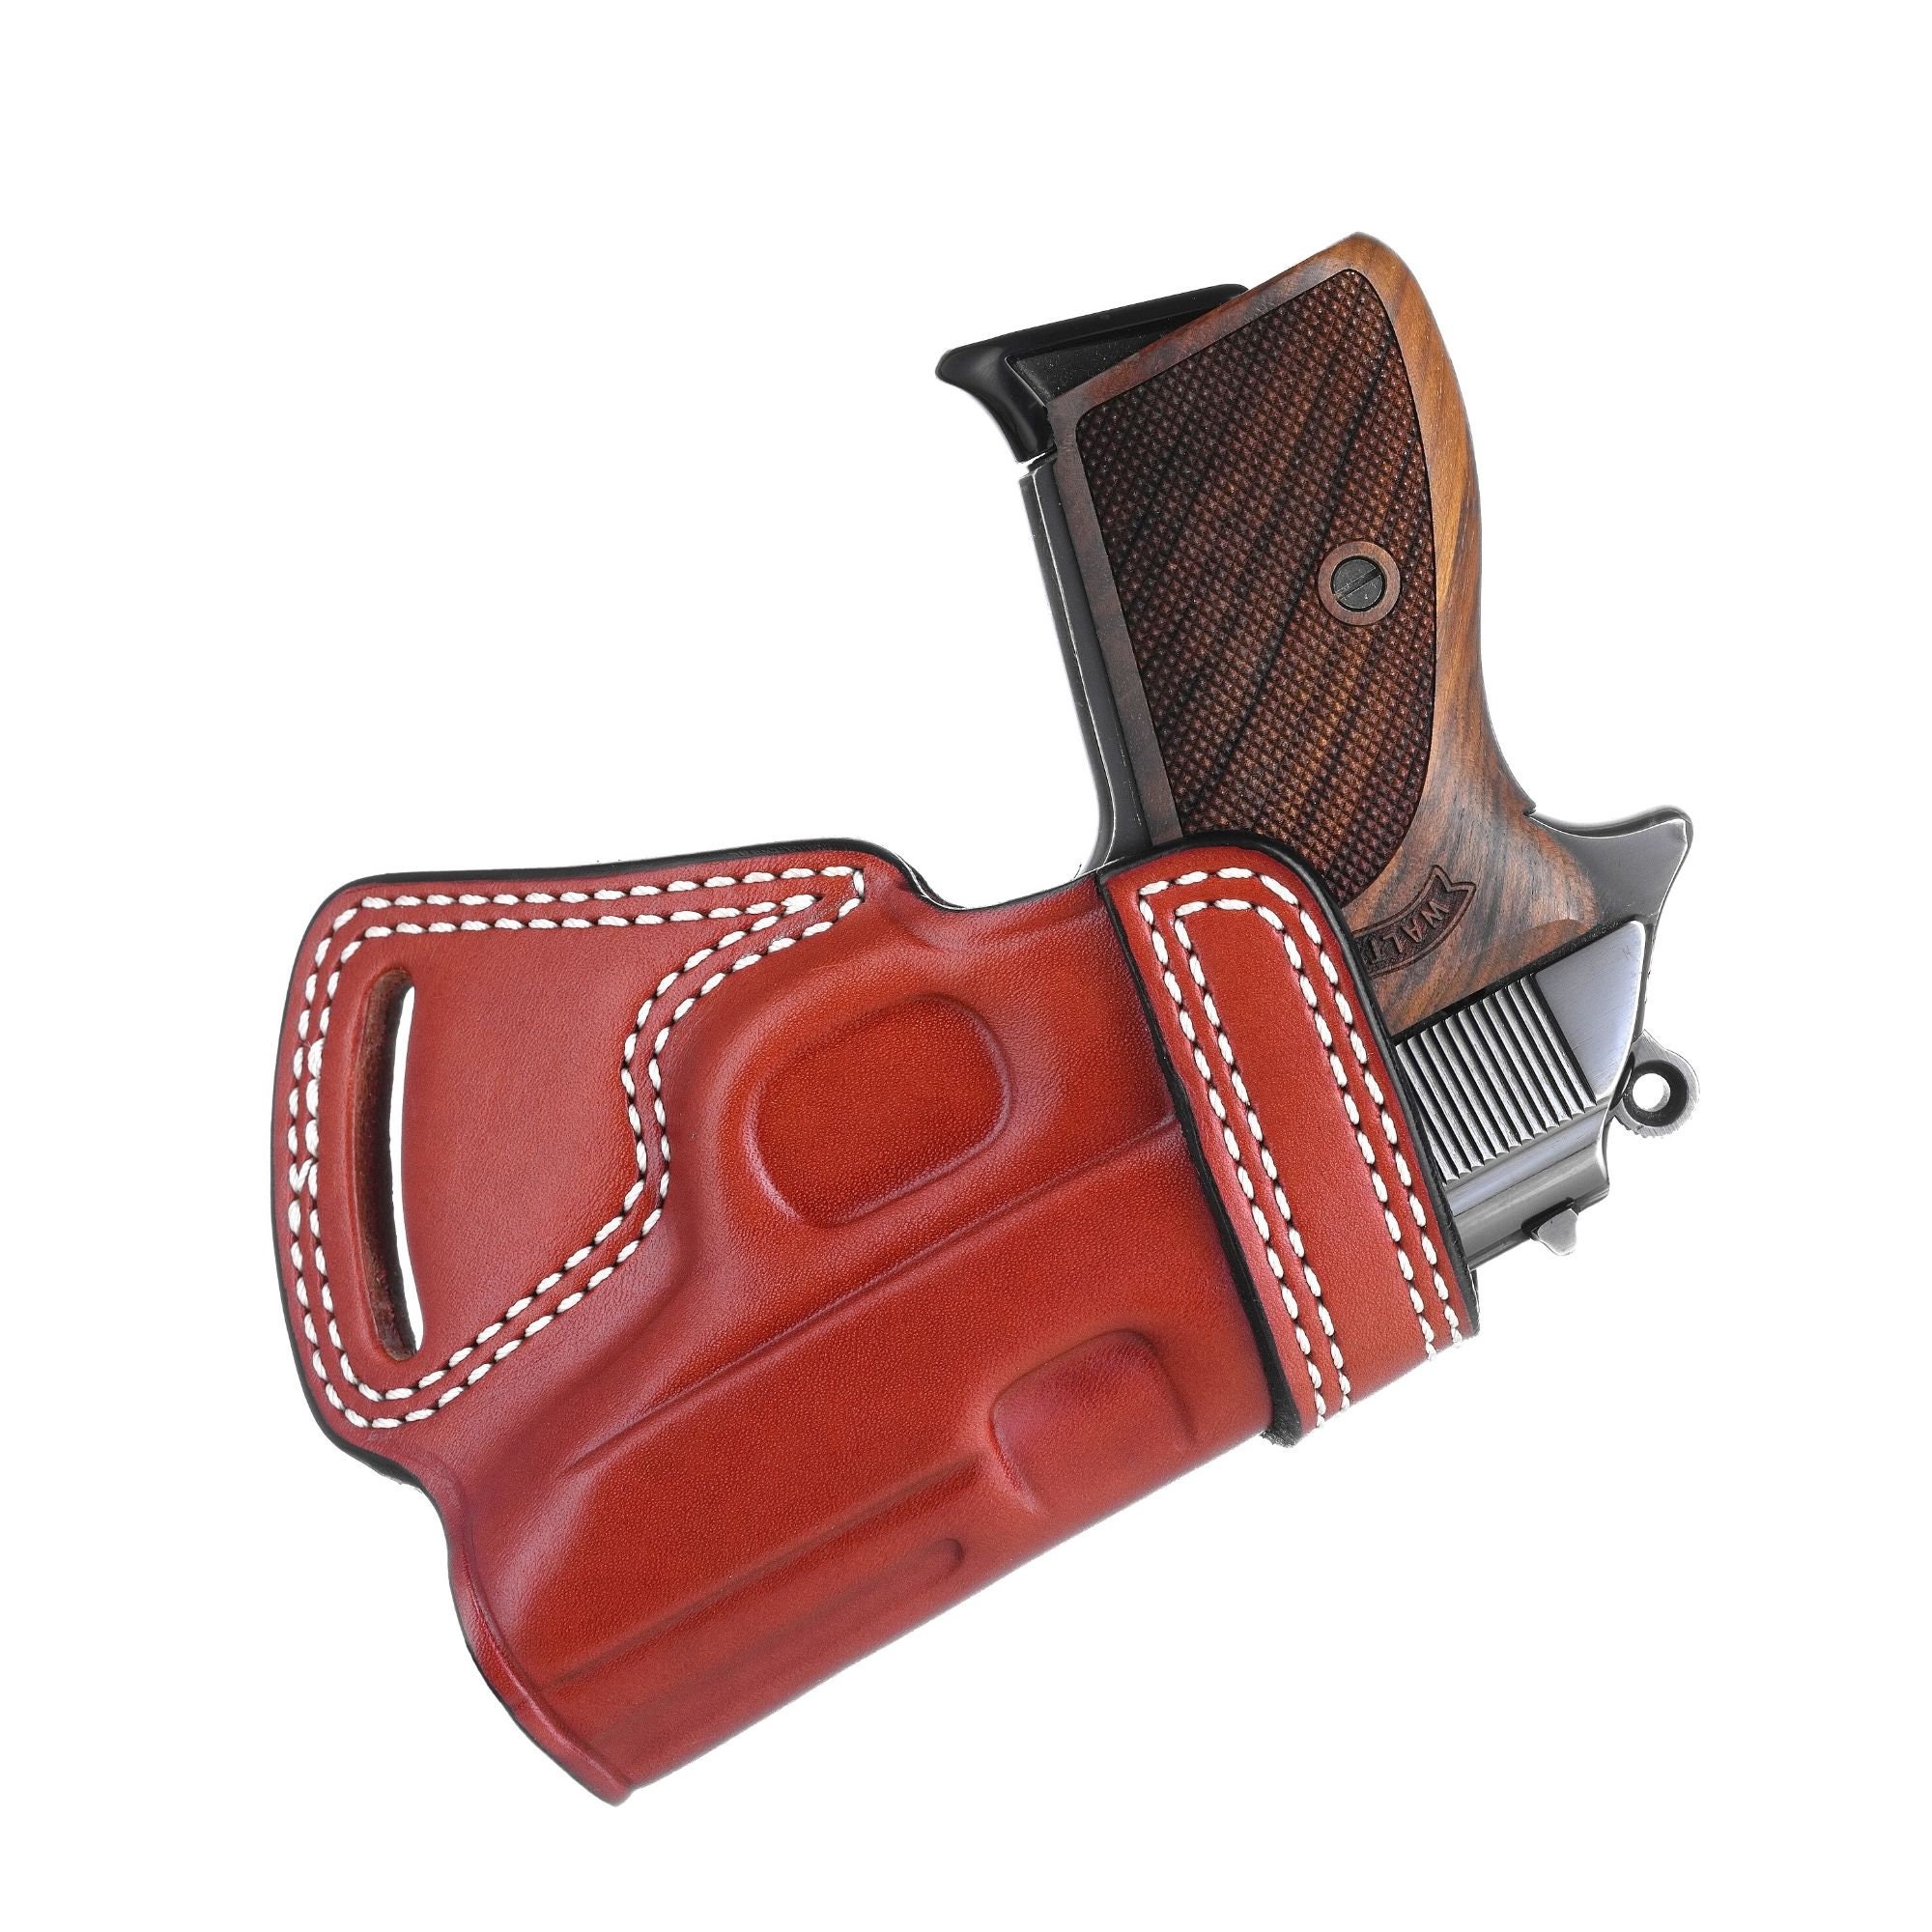 J&J SIG SAUER P250 P320 SUBCOMPACT TUCKABLE IWB FORMED PREMIUM LEATHER HOLSTER 